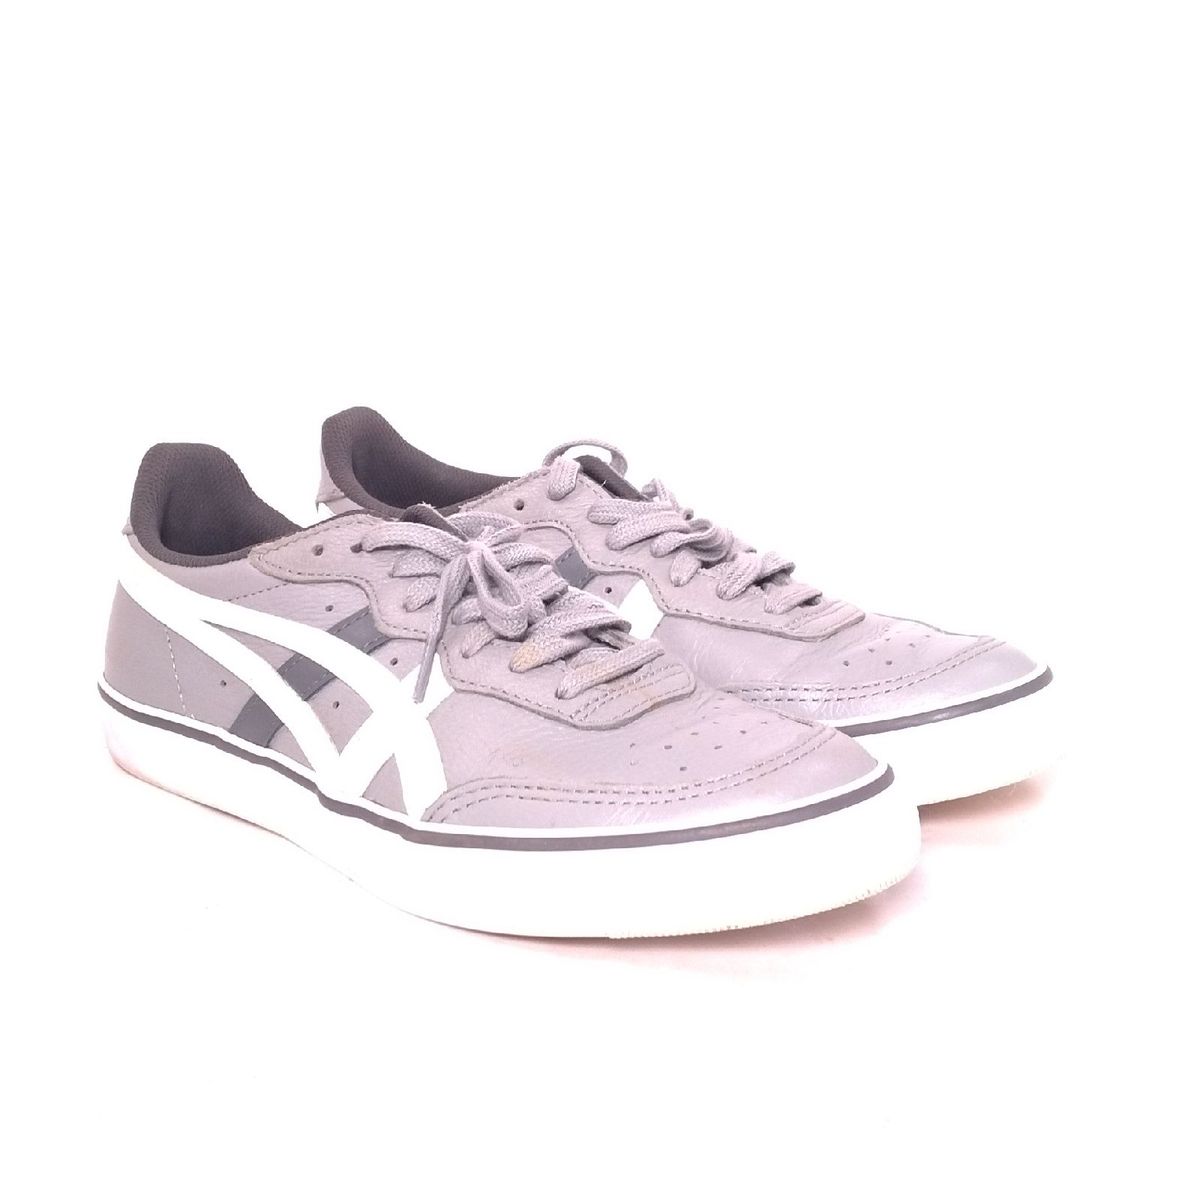 asics top spin lea